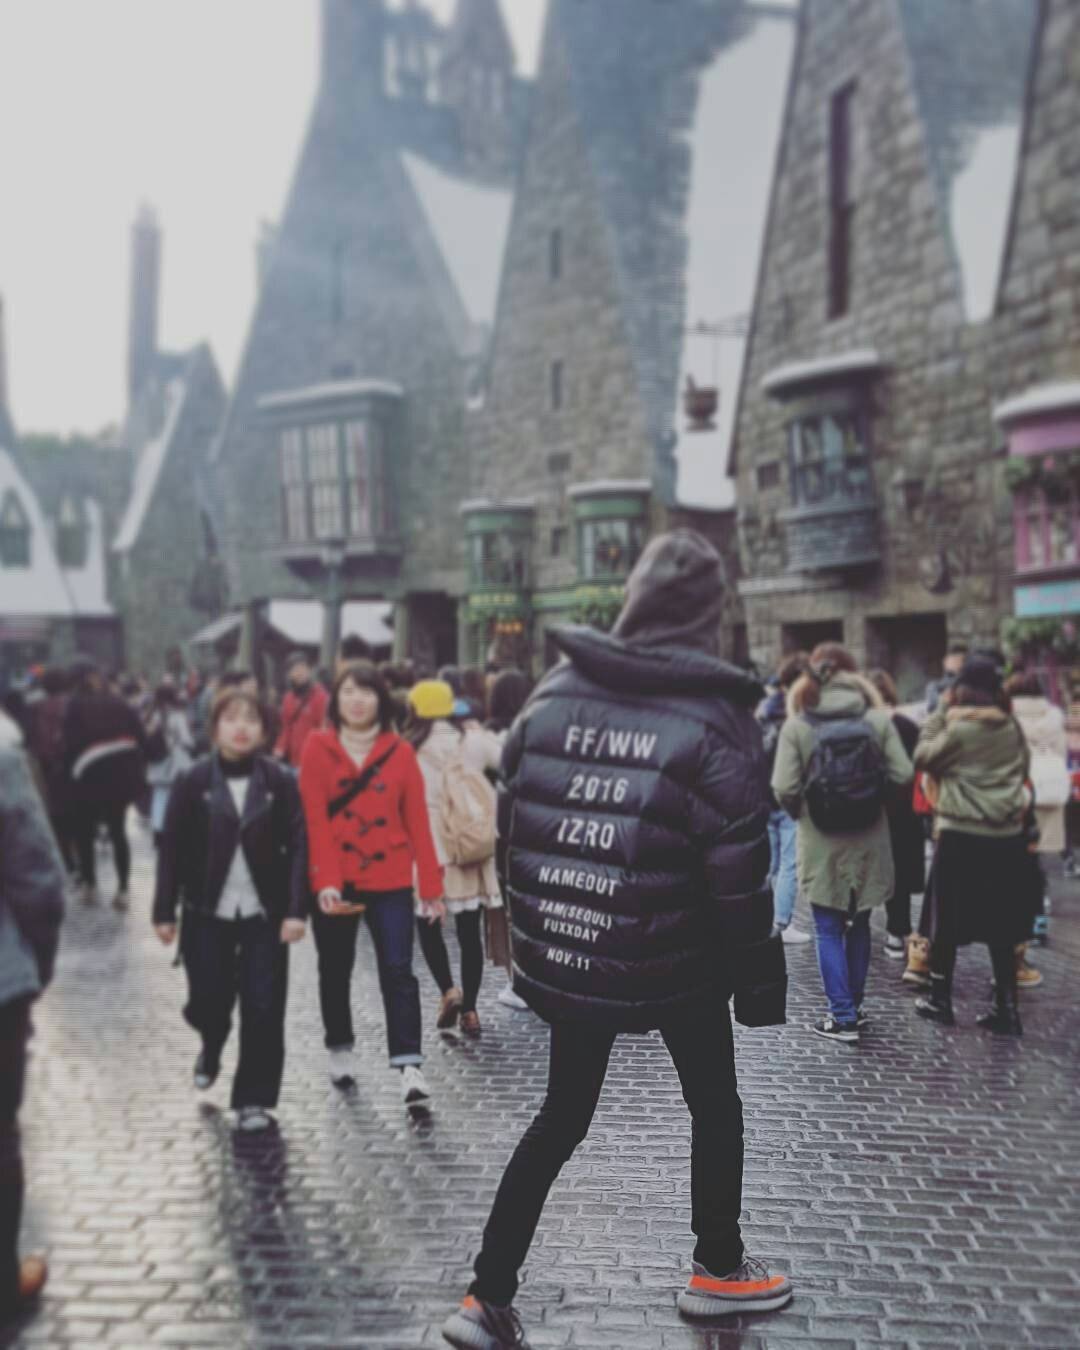 Chanyeol captioned this photo as "looking for the platform" where Harry Potter arrives at Hogwarts for the first time/ real_pcy